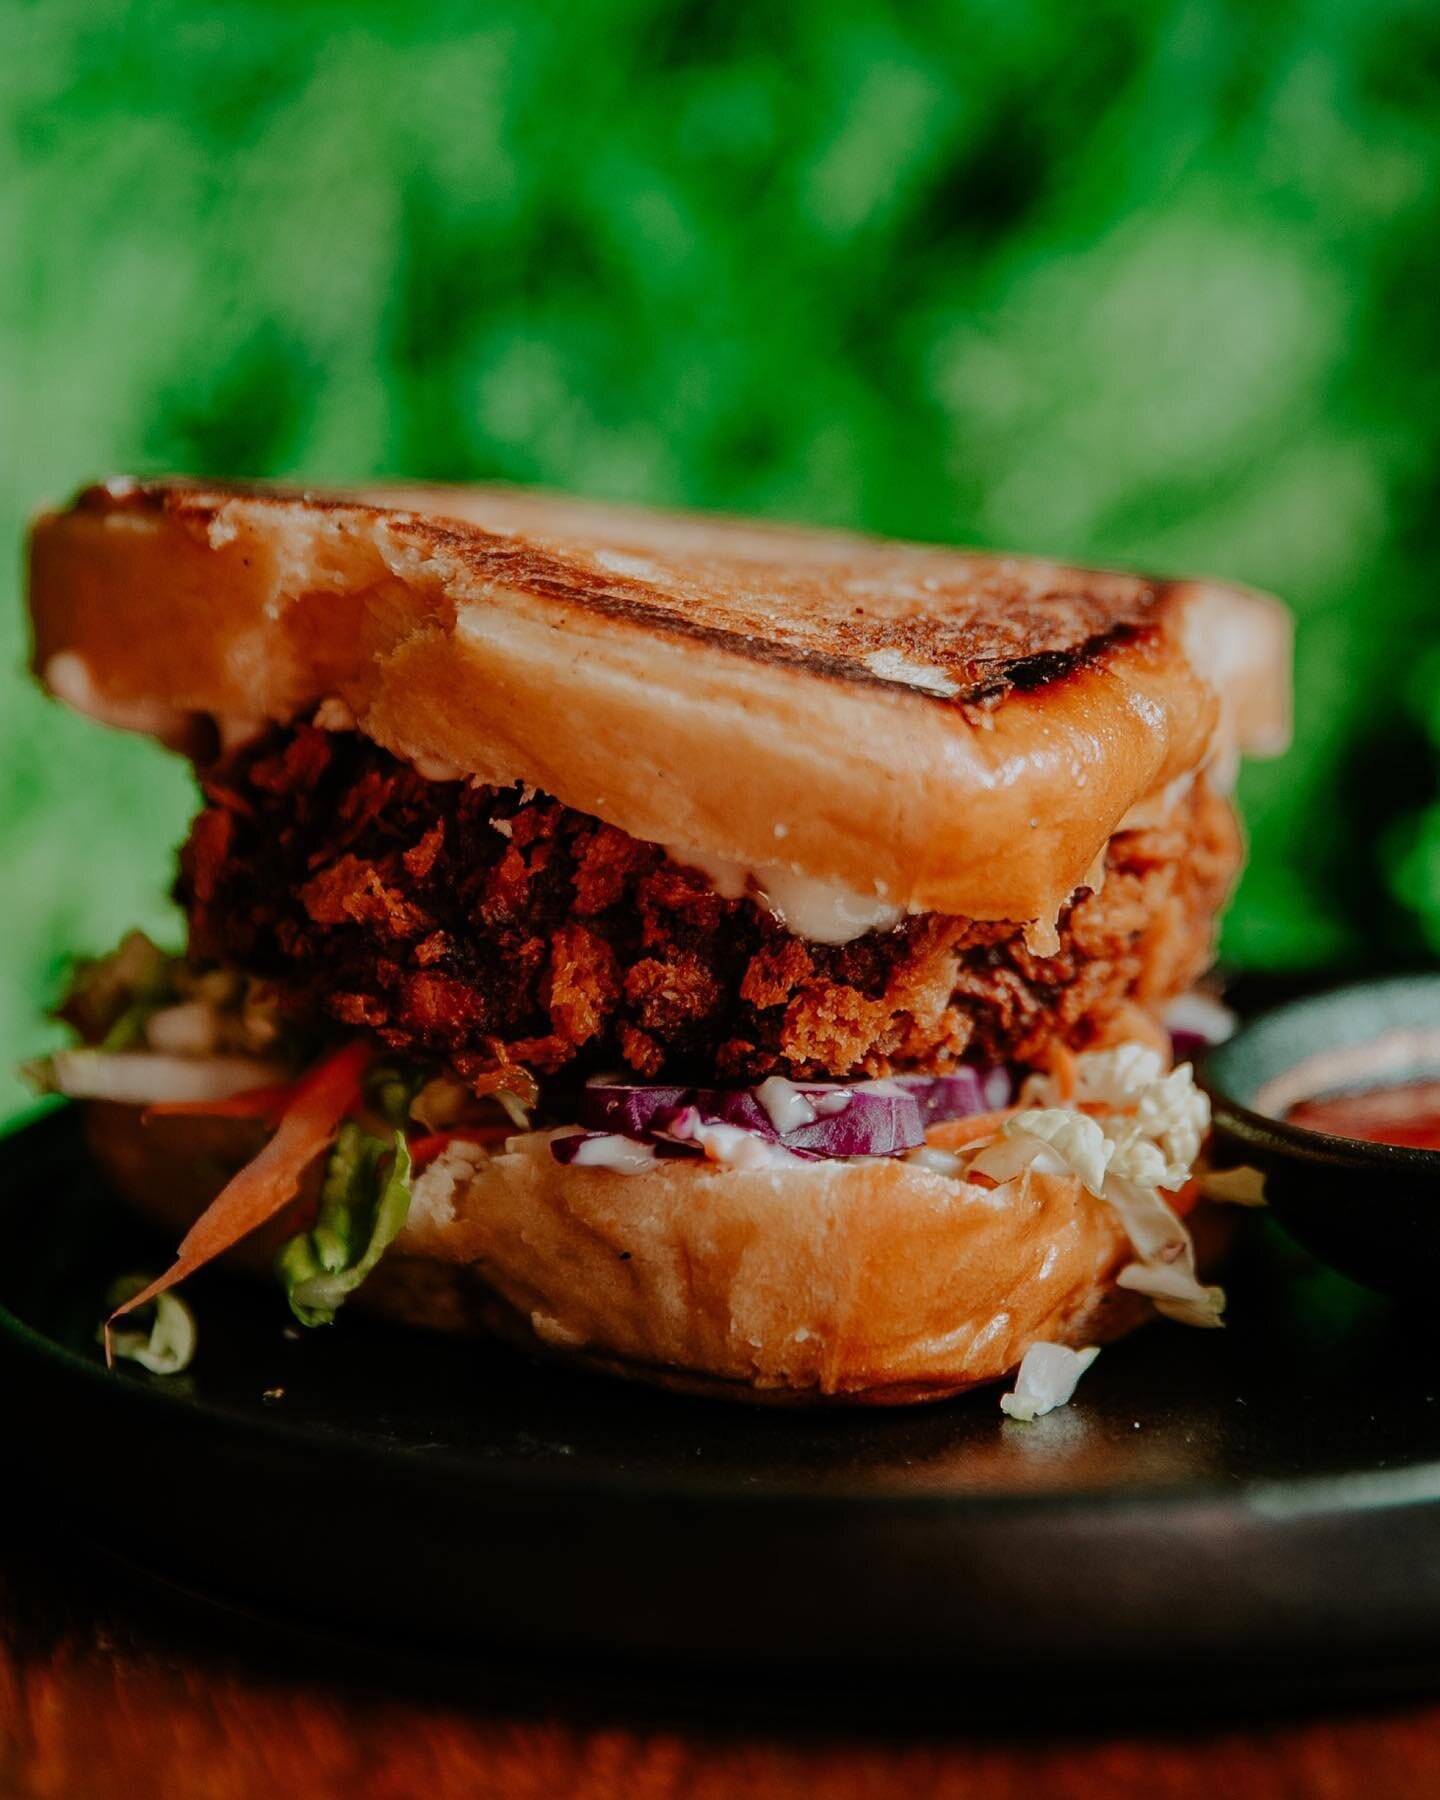 Take lunch to the next level with our SHRIMP CUTLET sando! 😍

Our new lunch menu is perfect for those looking for a swift and refreshing lunch experience. Choose from 5 new additions including this shrimp cutlet sando which is seasoned with Thai aro